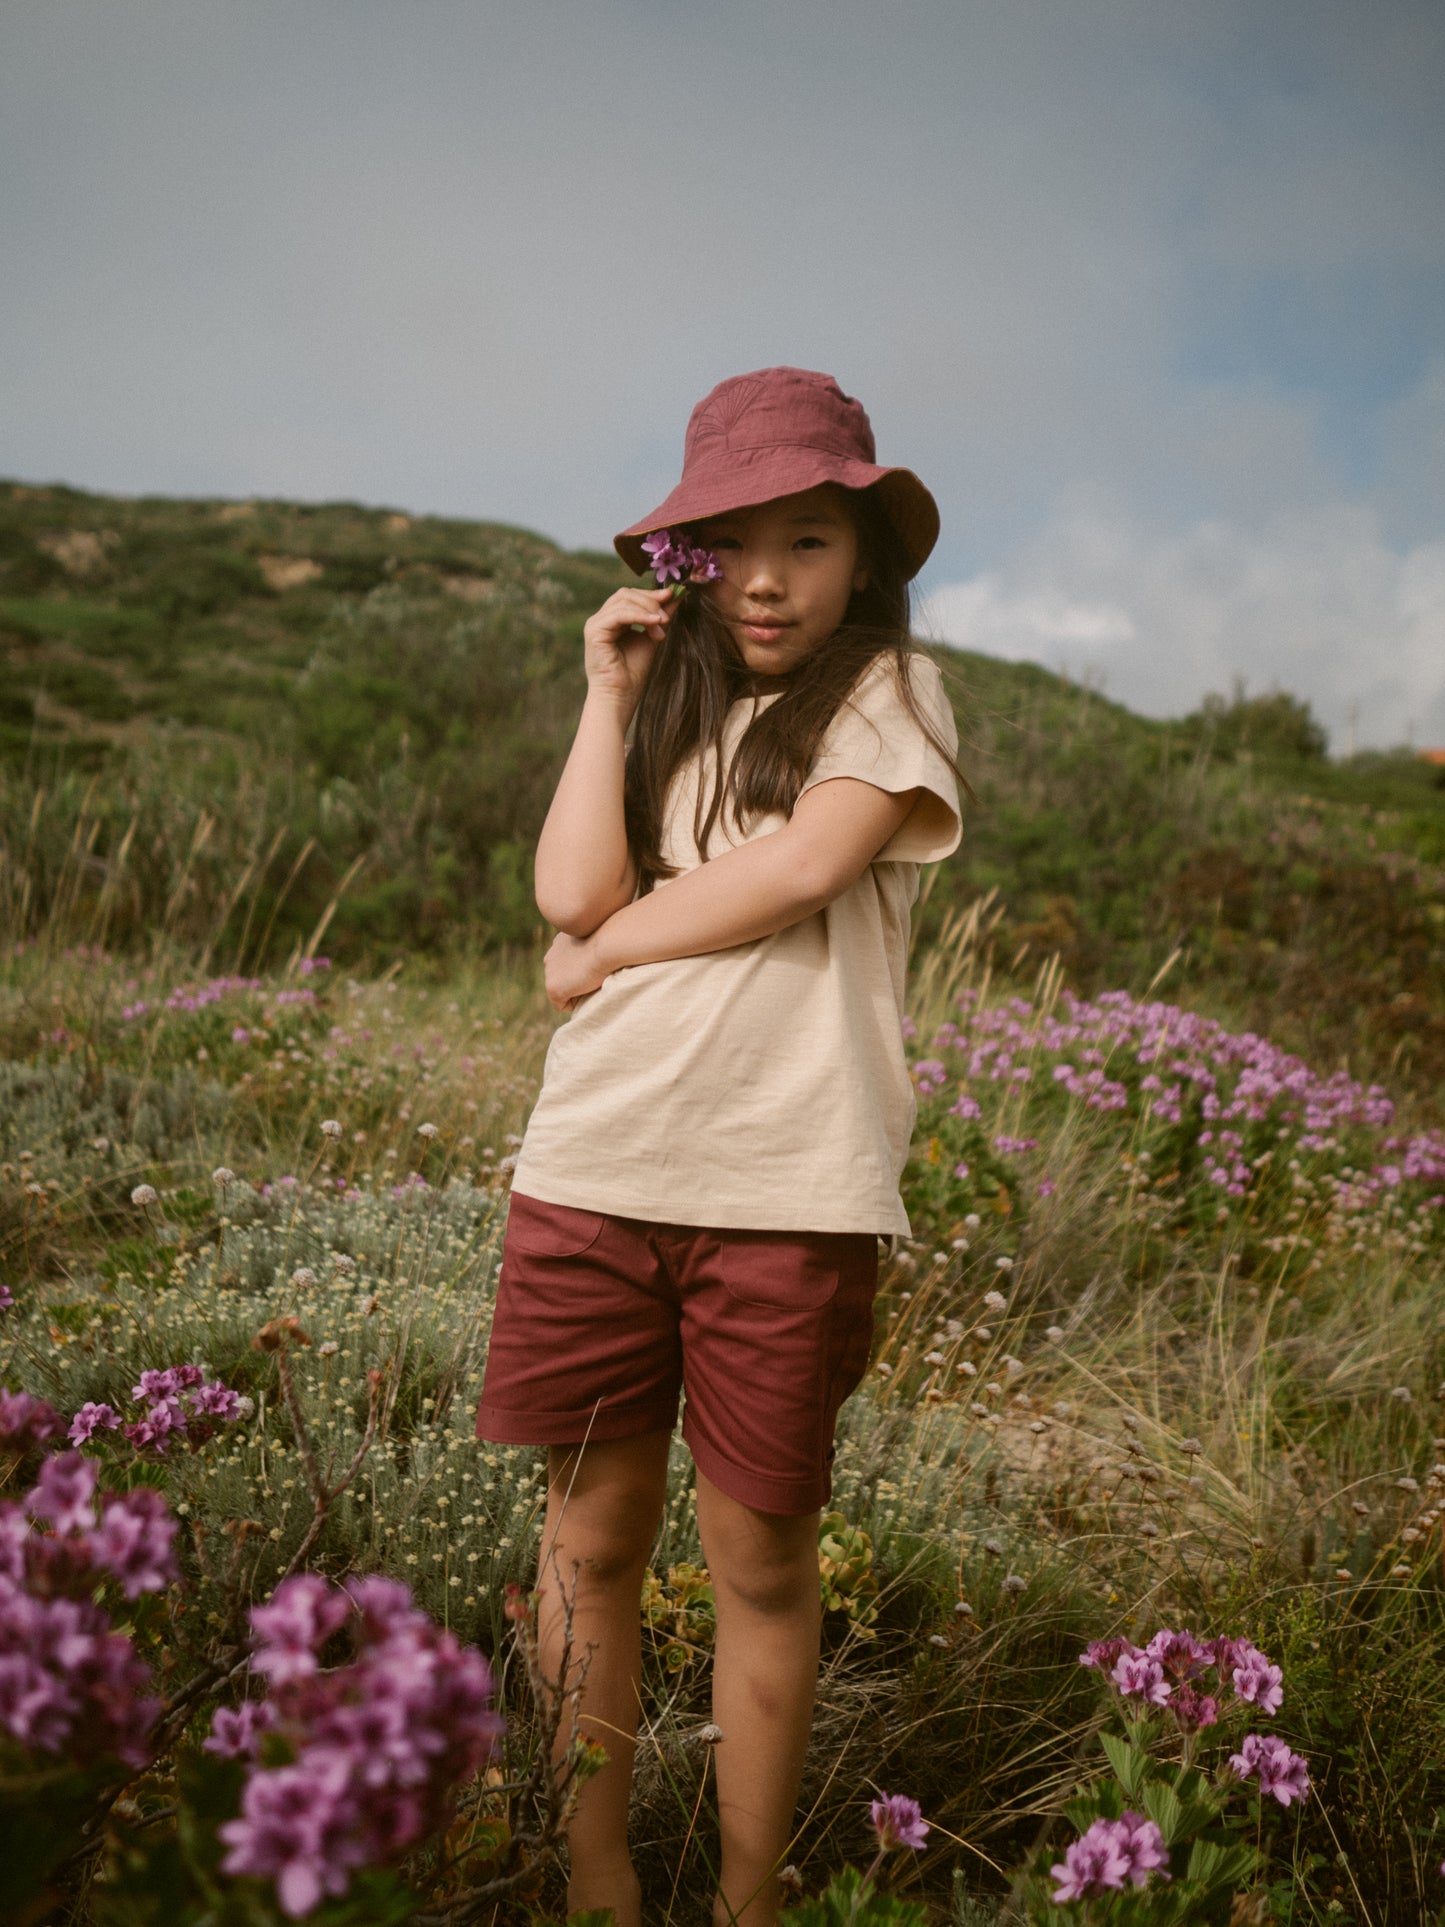 Willow burgundy cotton shorts- Canyon Clay